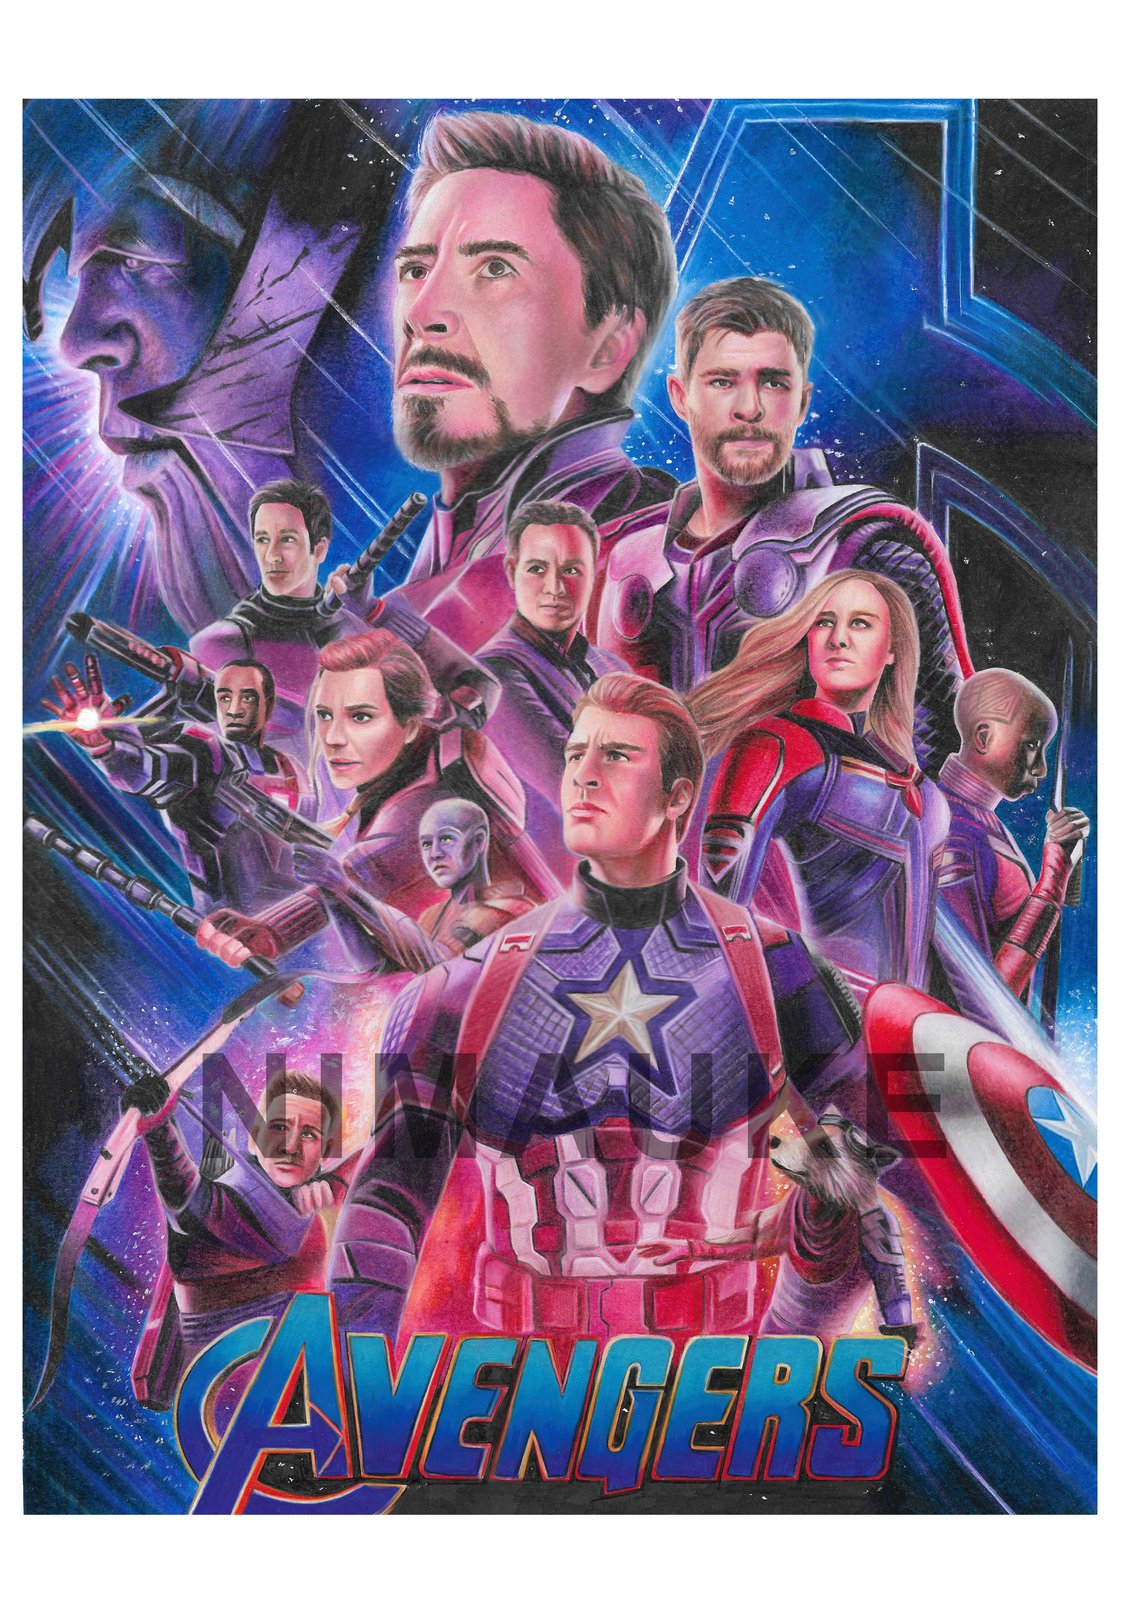 Drawing Captain America Avengers Assemble by Jaycarts on DeviantArt